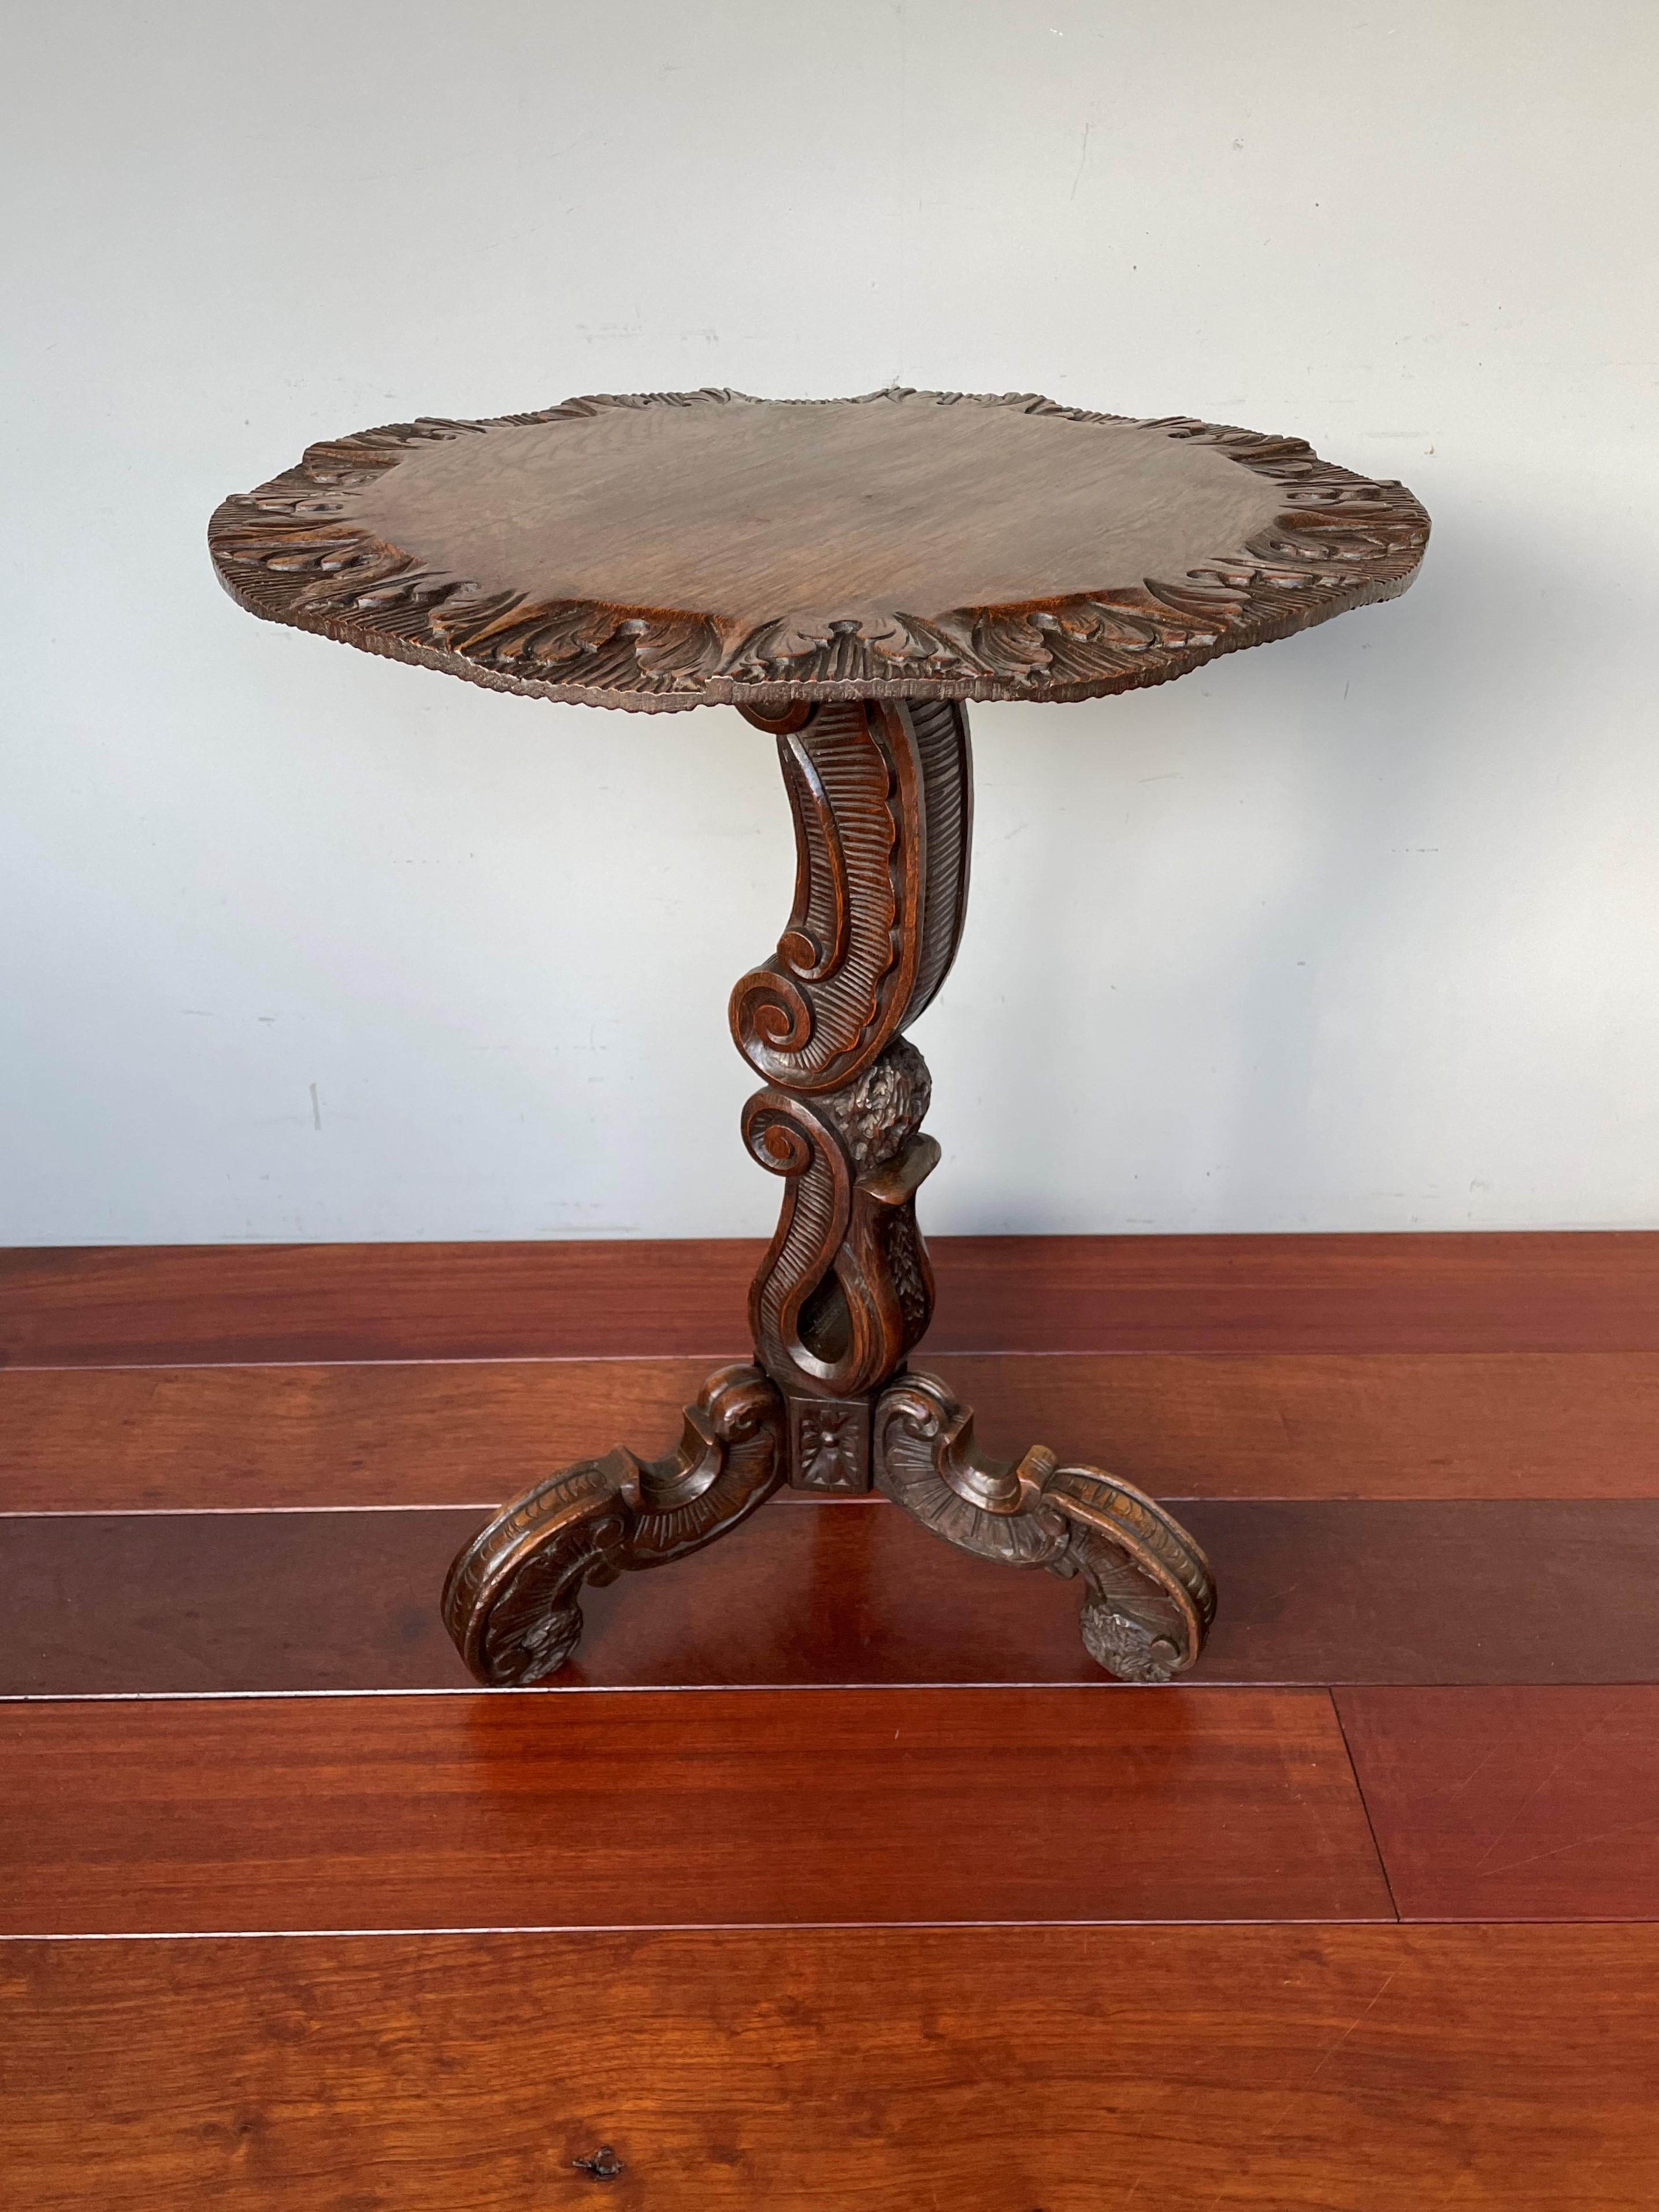 Remarkable workmanship and excellent condition table from ca. 1850

The Rococo Style derives its name from the French word 'rocaille' which is an assymetrical shell motif that was often used in 18th century Baroque. If you look at the striking stem